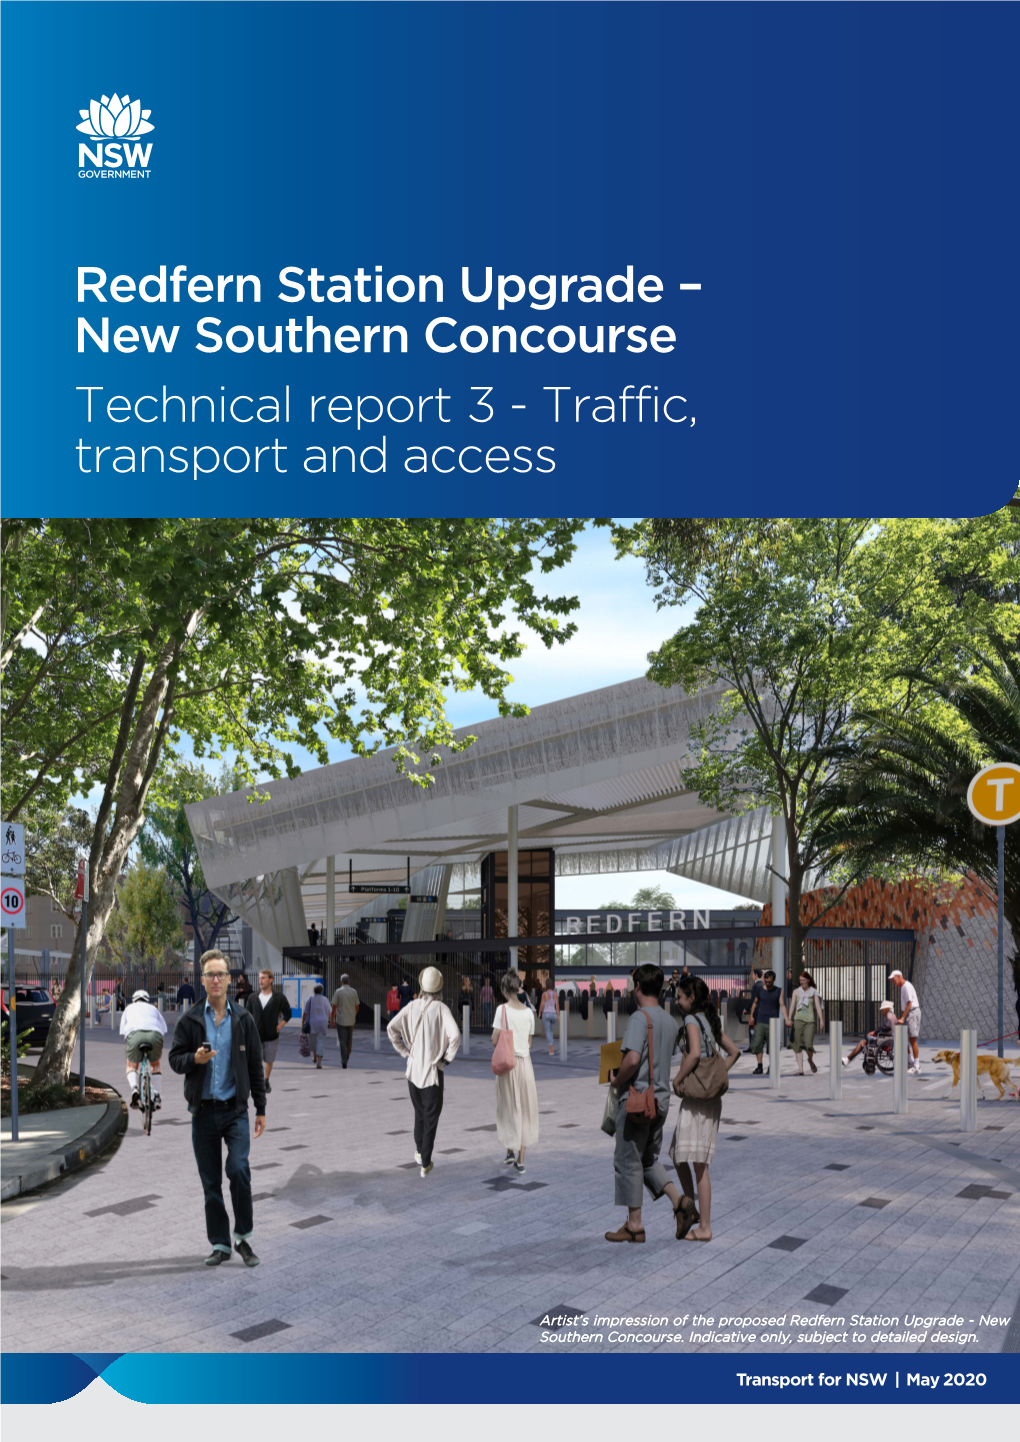 Redfern Station Upgrade – New Southern Concourse Technical Report 3 - Traffic, Transport and Access